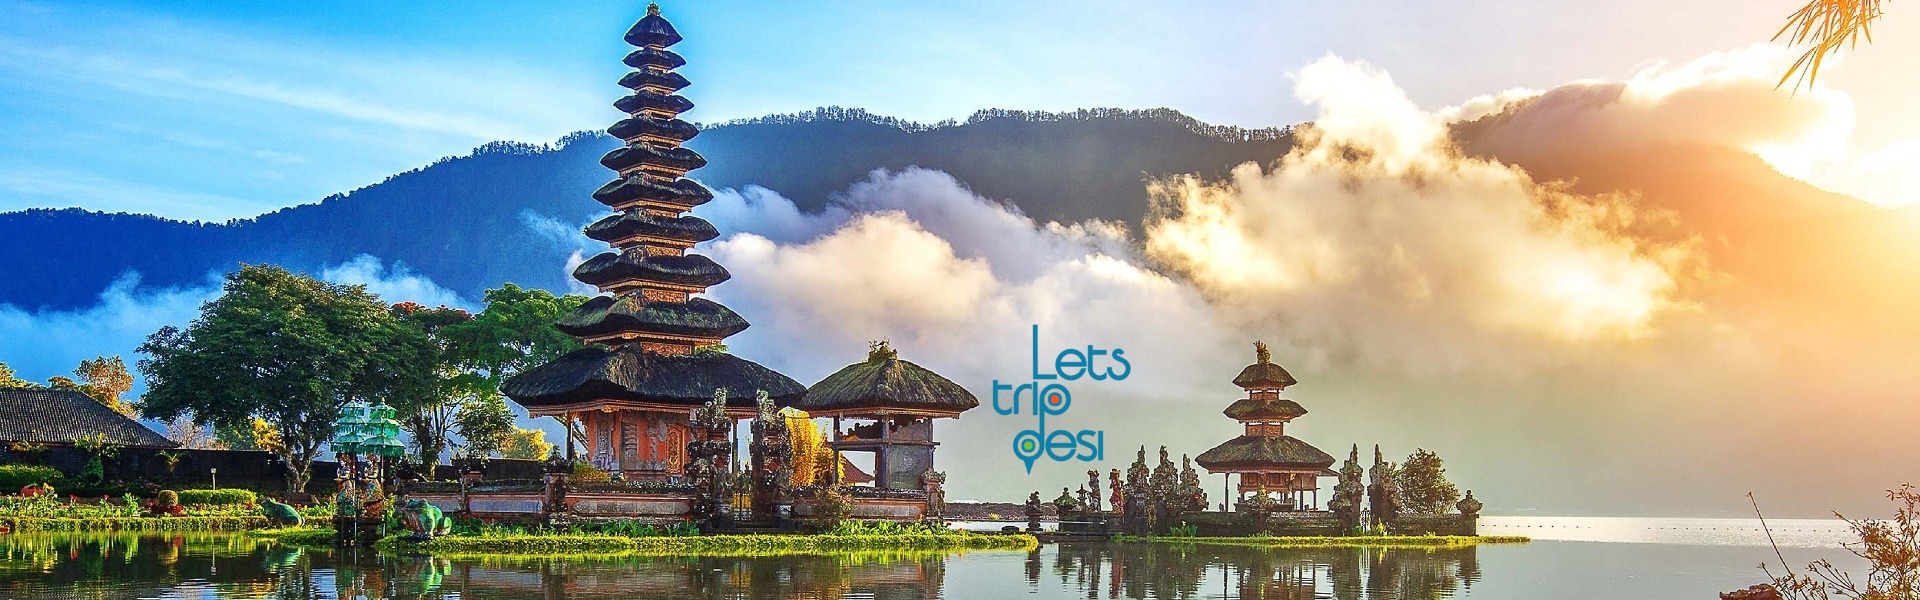 best time to visit bali indonesia